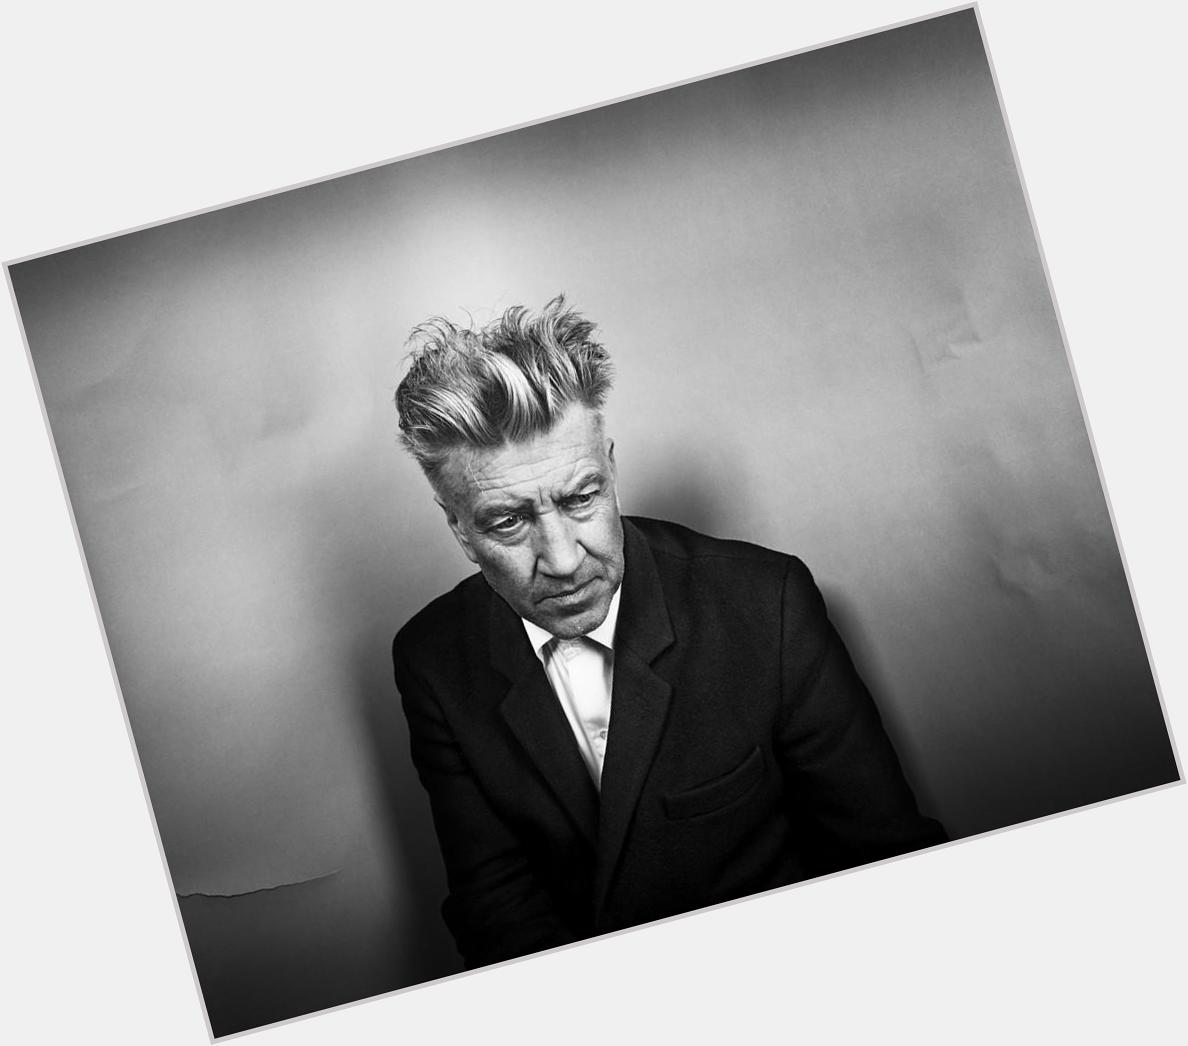 Happy birthday, David Lynch!

Celebrate by watching one of his 10 favorite films:  